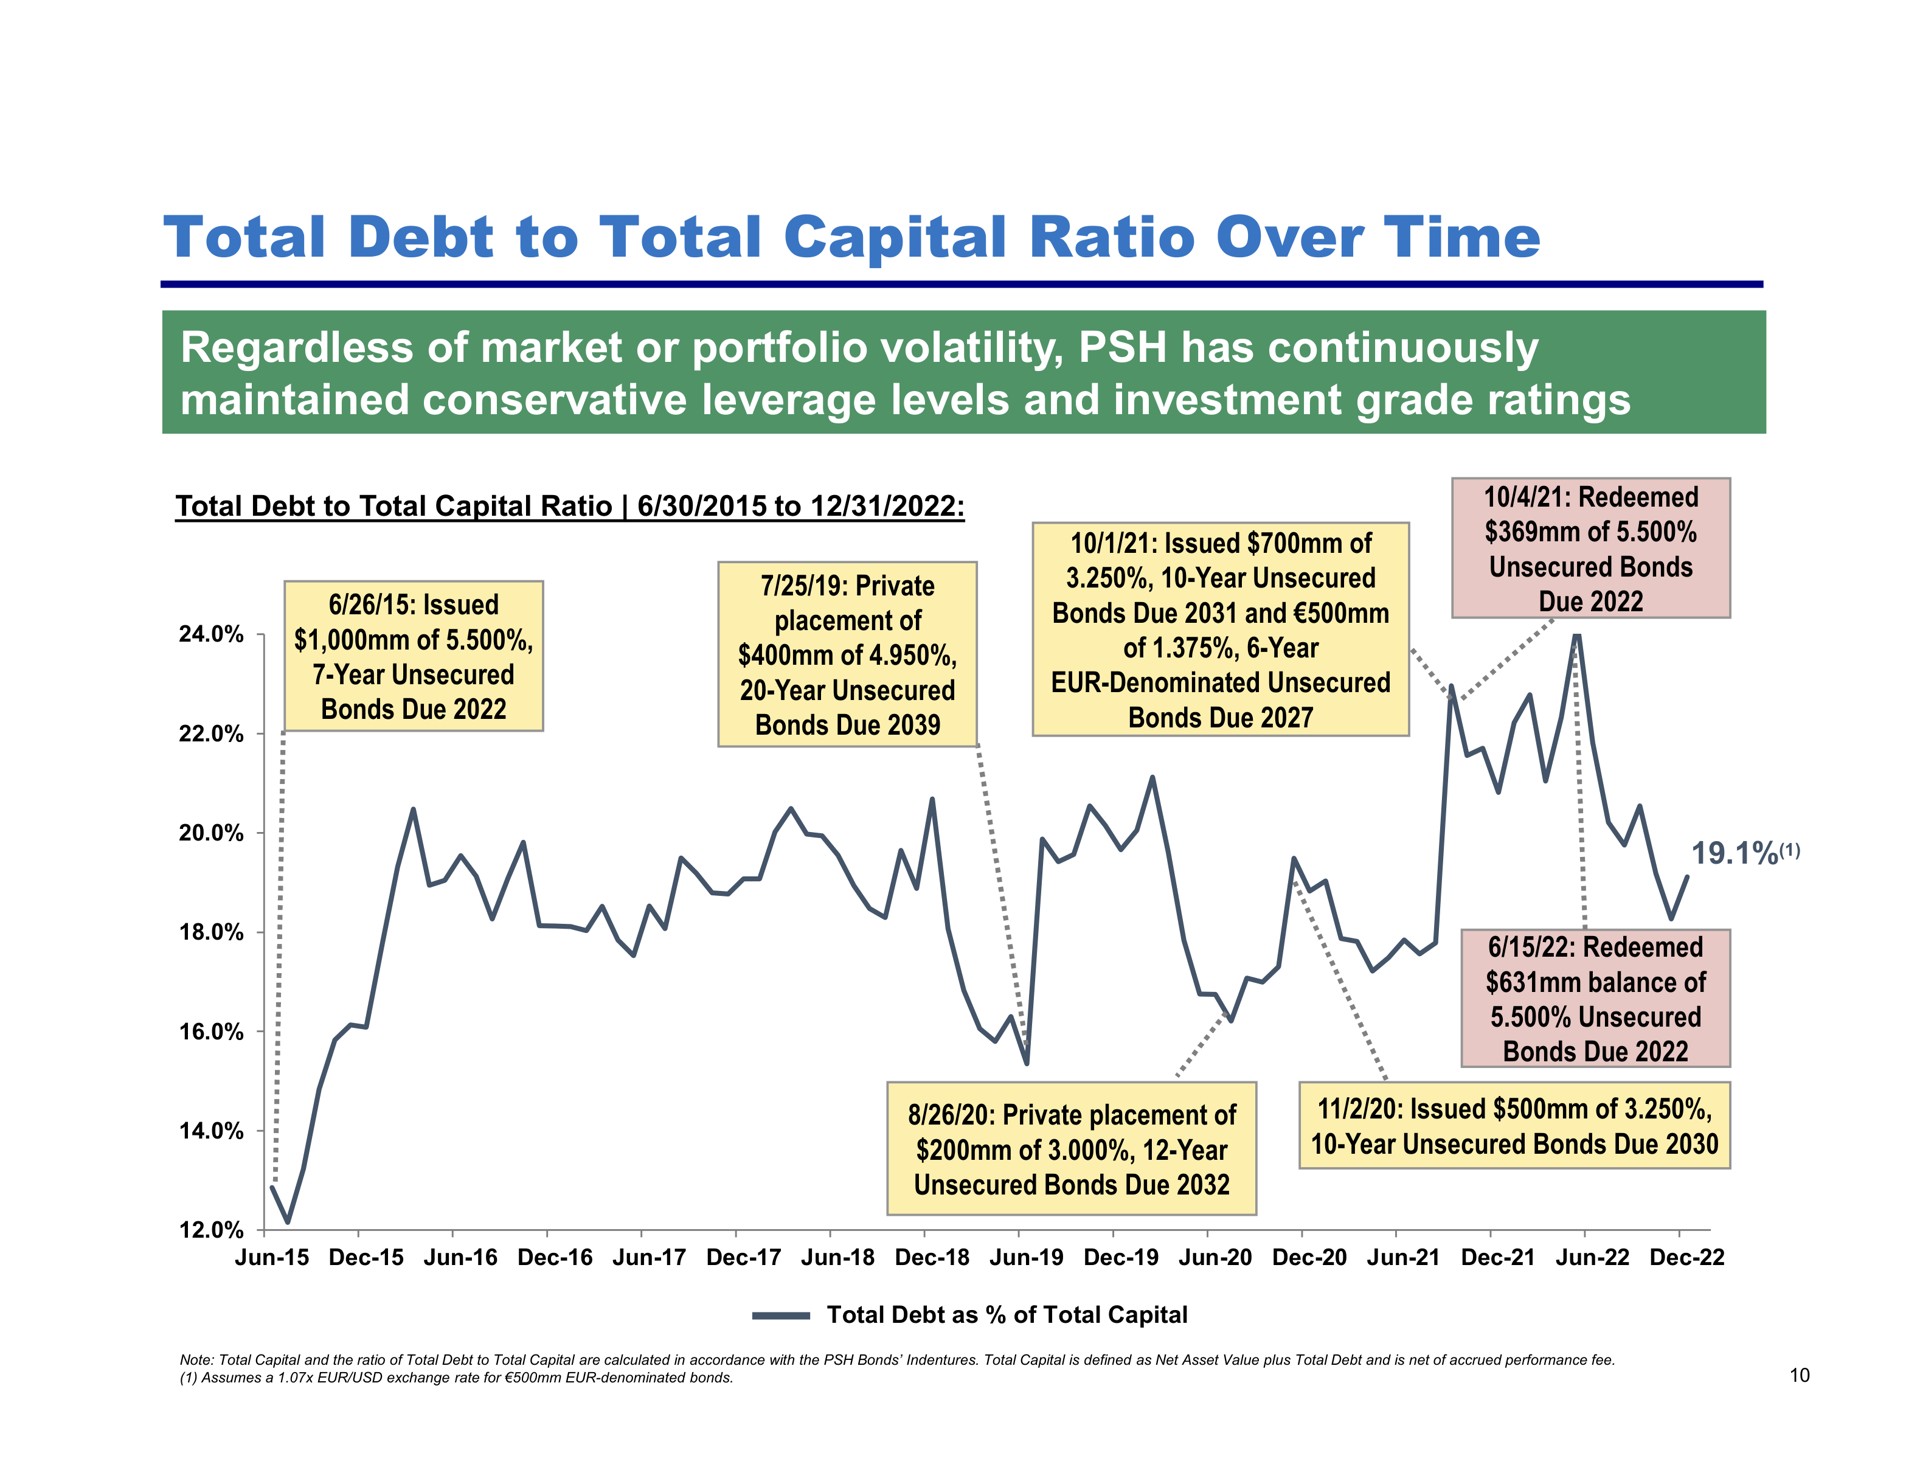 total debt to total capital ratio over time regardless of market or portfolio volatility has continuously maintained conservative leverage levels and investment grade ratings issued placement bonds due issued bonds due bonds due | Pershing Square